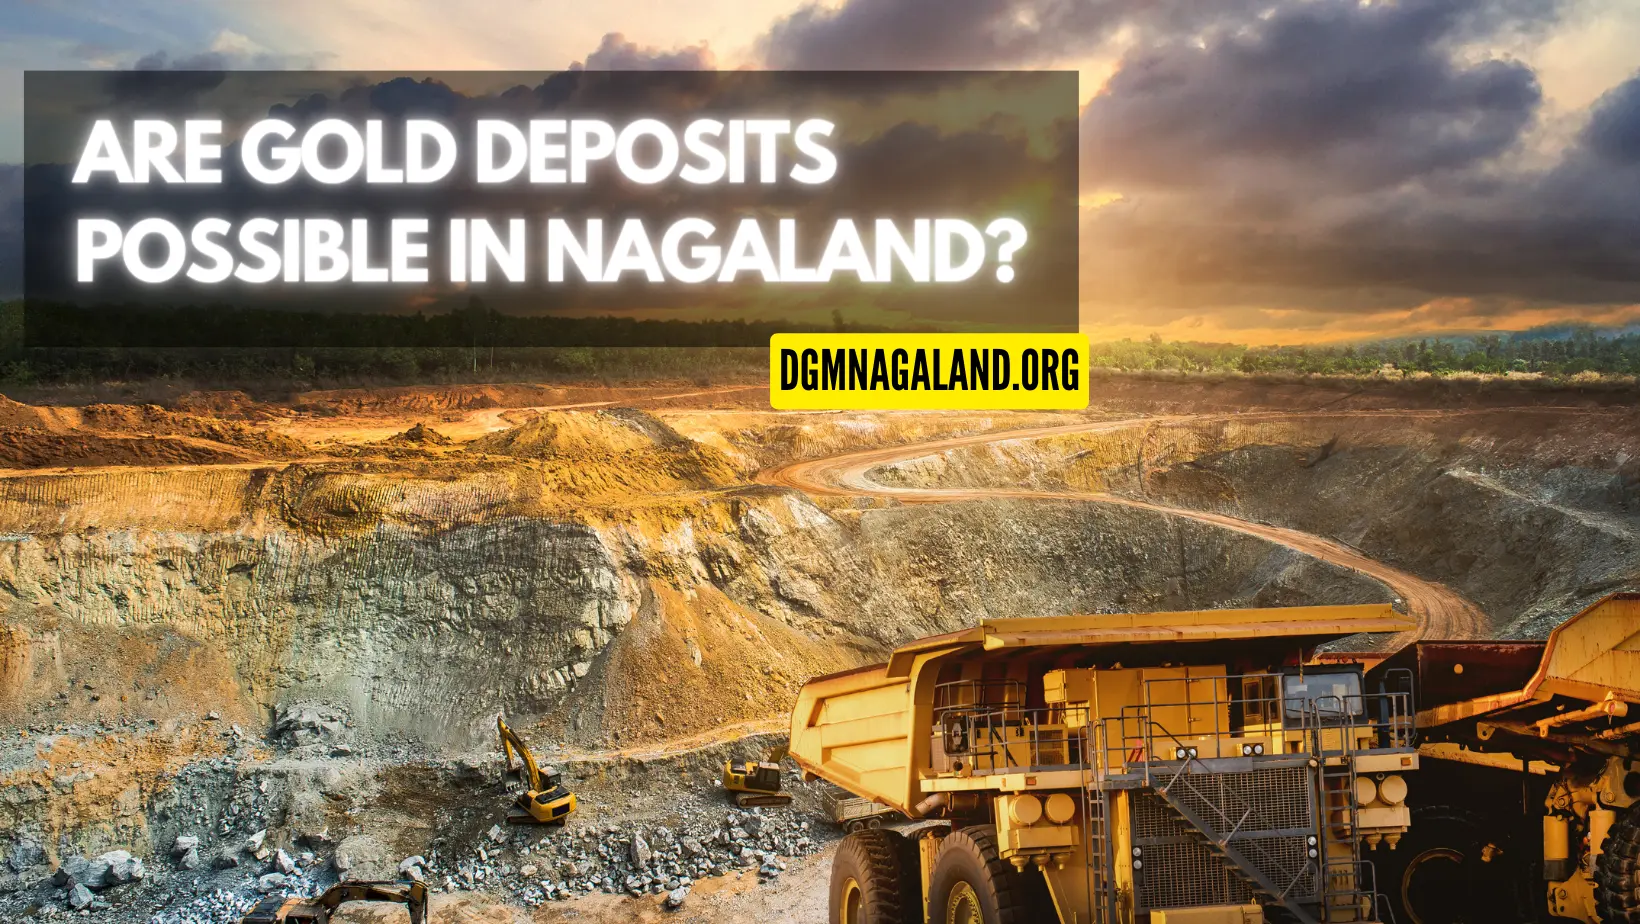 Gold nuggets - Are Gold Deposits Possible in Nagaland?